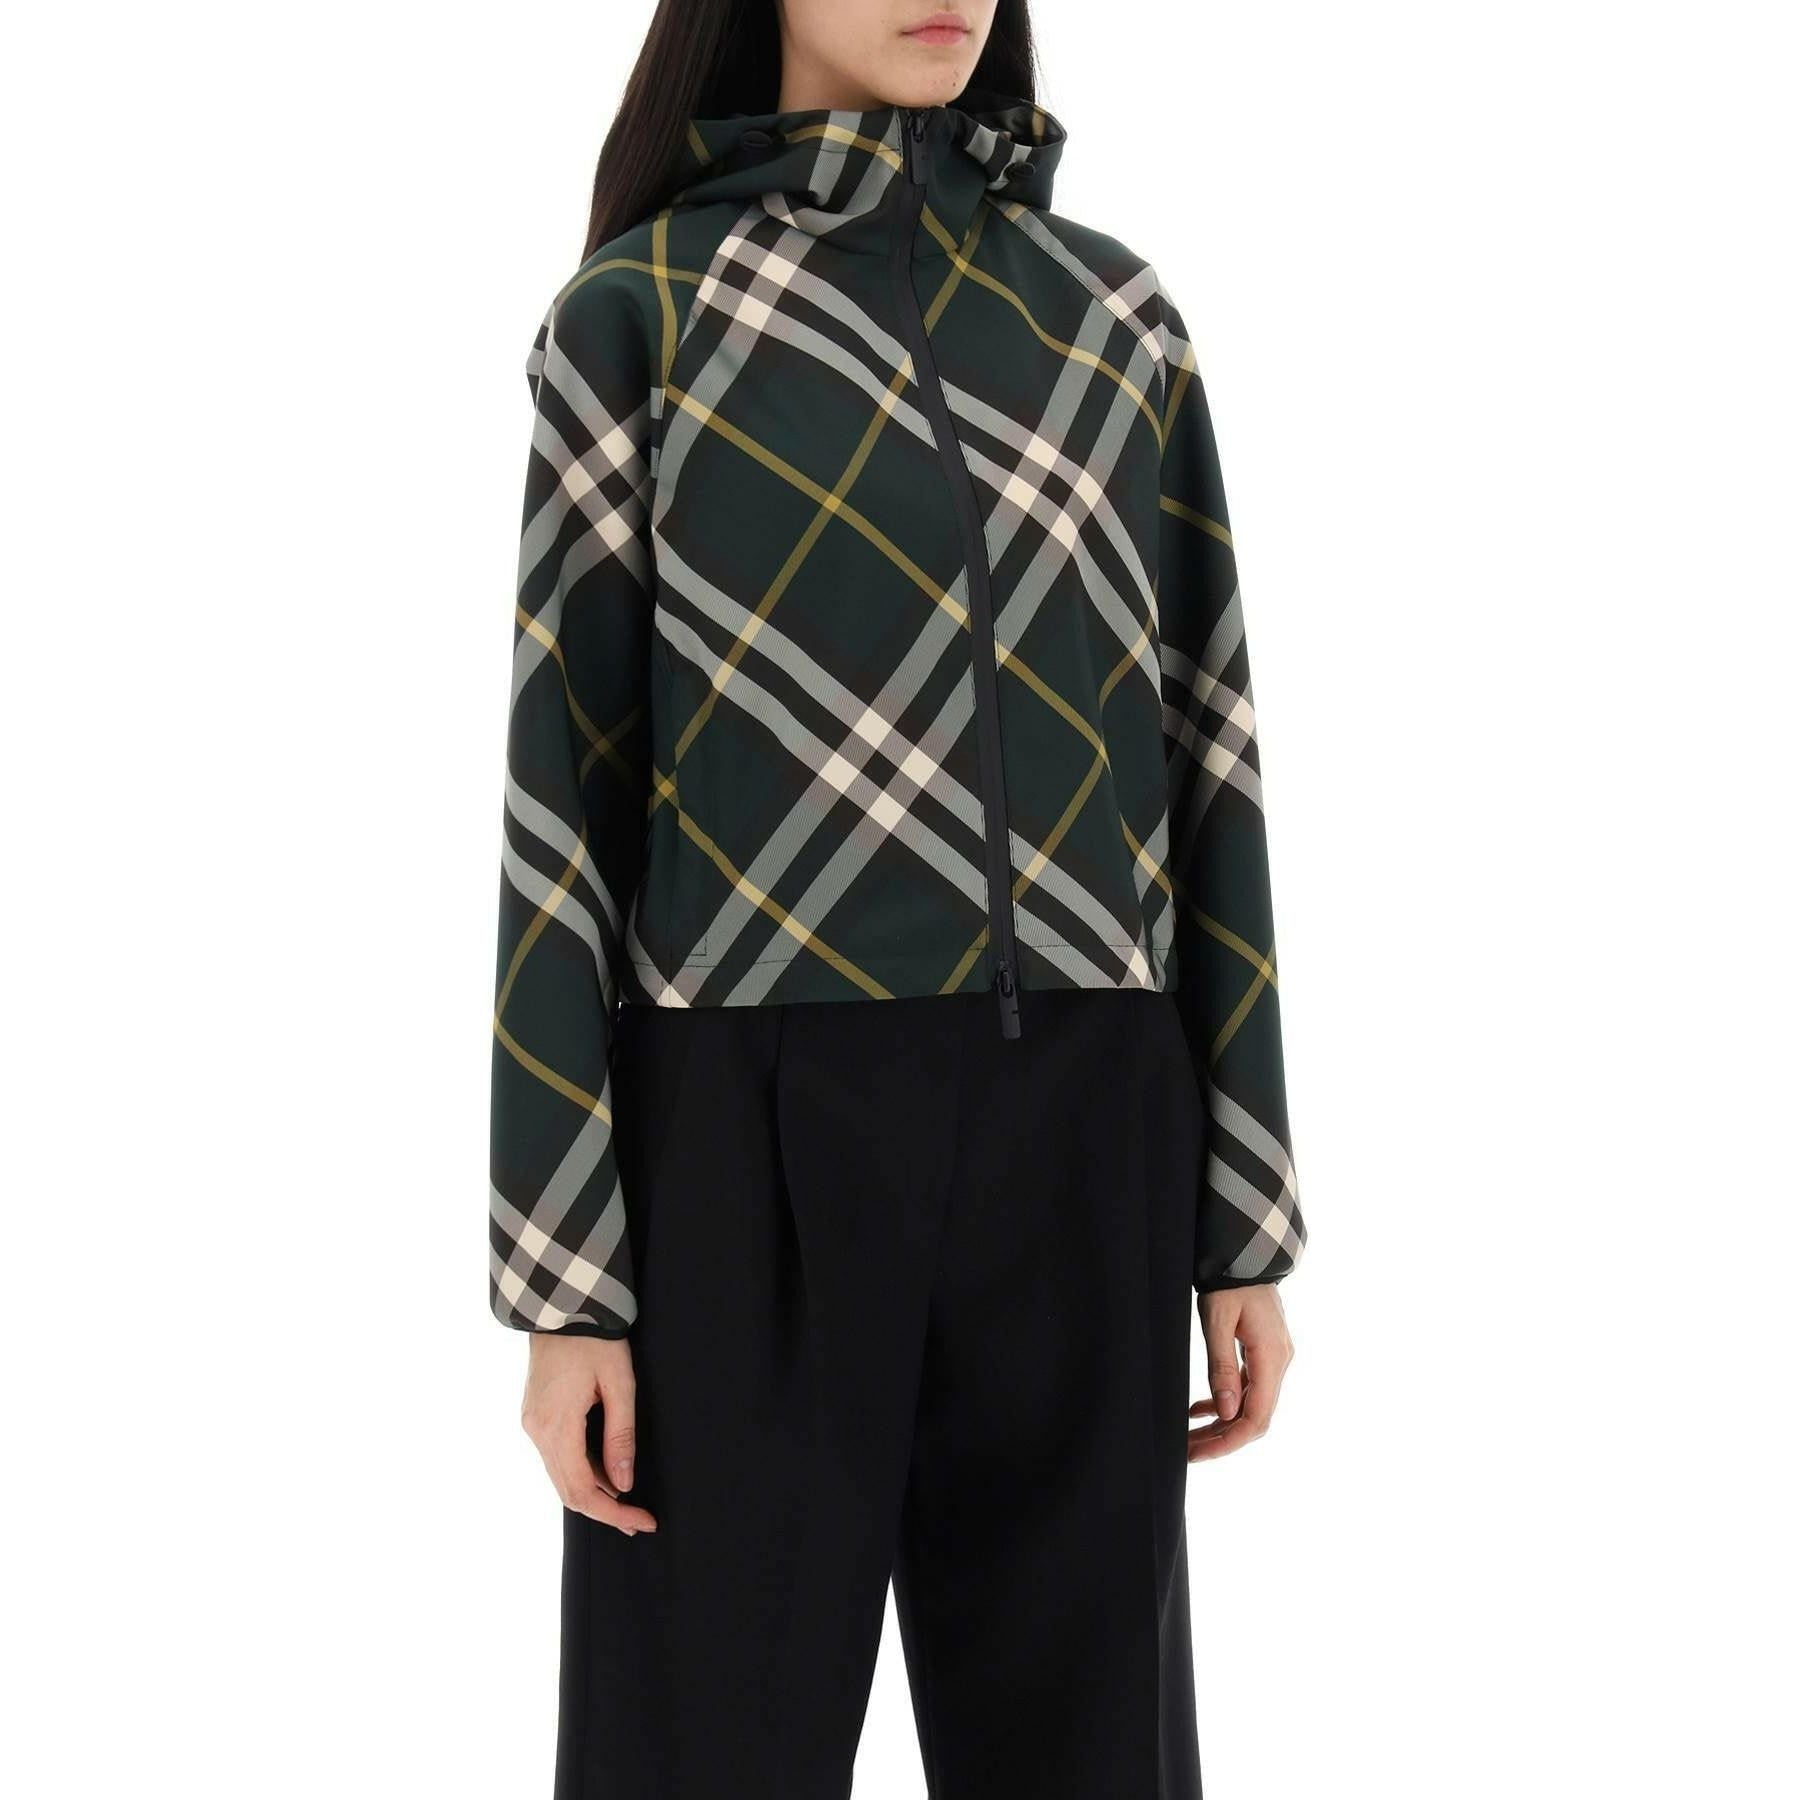 Cropped Check Lightweight Jacket in Ivy BURBERRY JOHN JULIA.